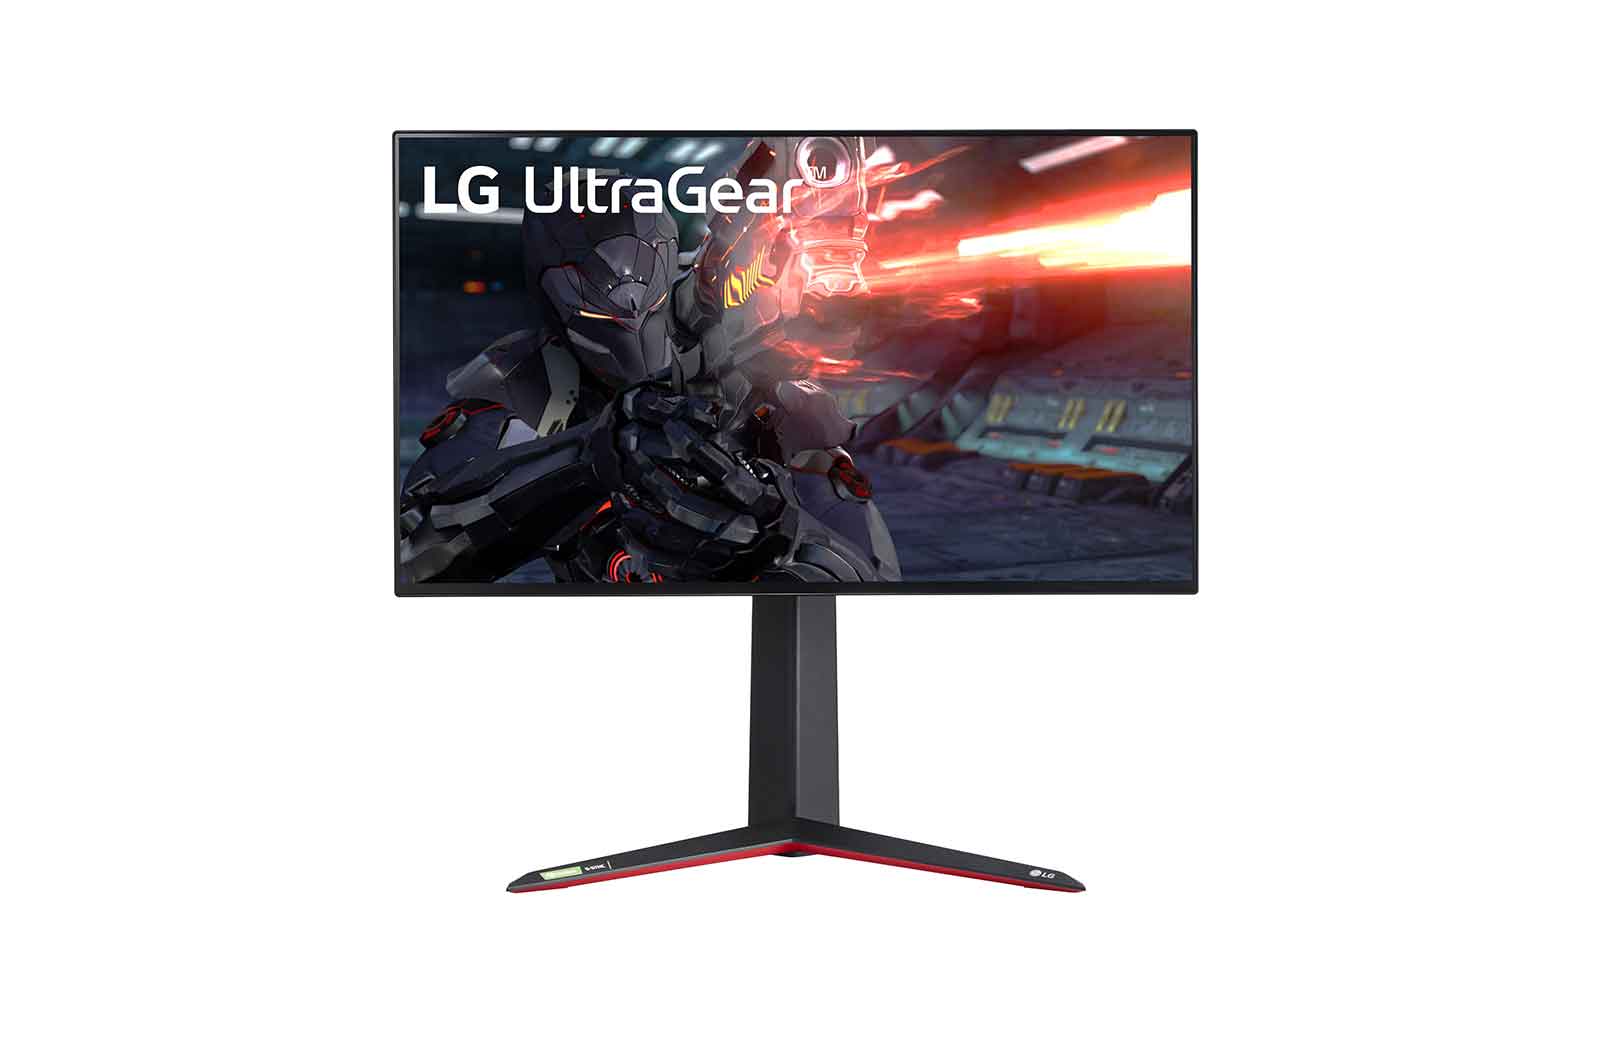 Lg S Ultragear 27gn950 Is The 4k 144hz Gaming Monitor To Have Tom S Hardware